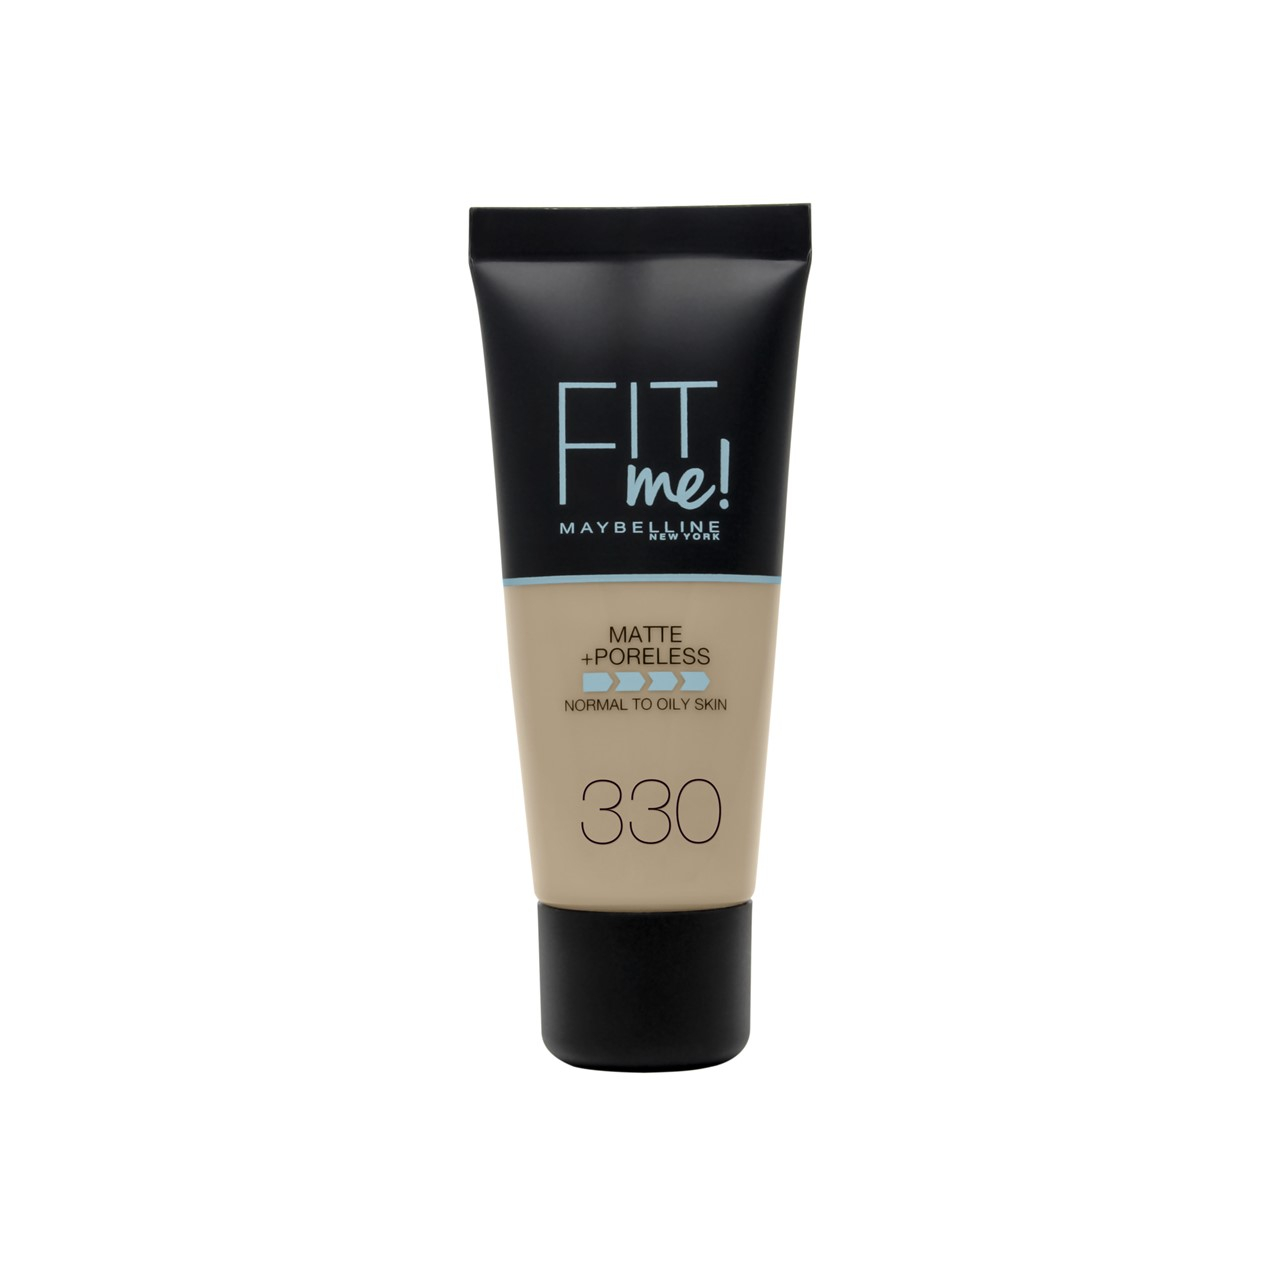 Maybelline Fit Me Matte & Poreless Foundation 330 Toffee 30ml